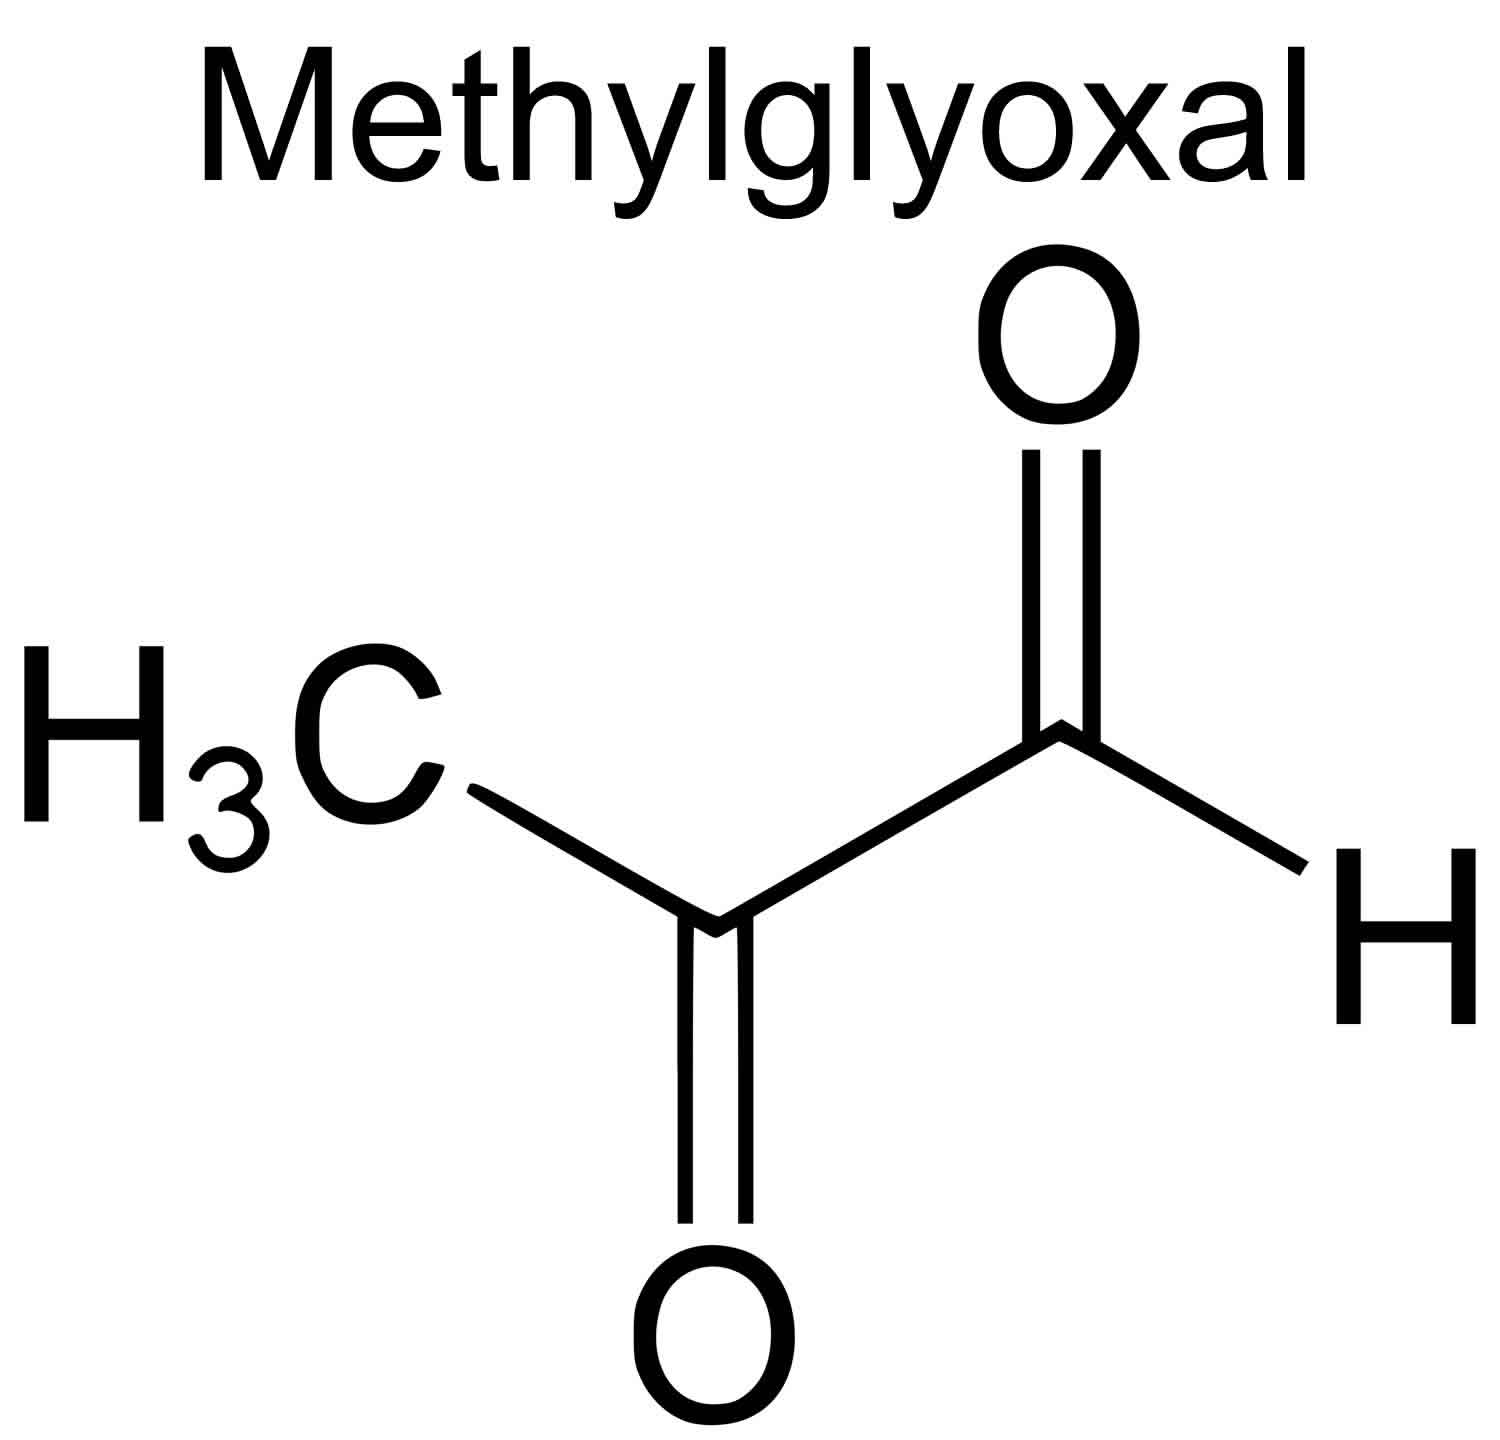 Methylglyoxal chemical structure